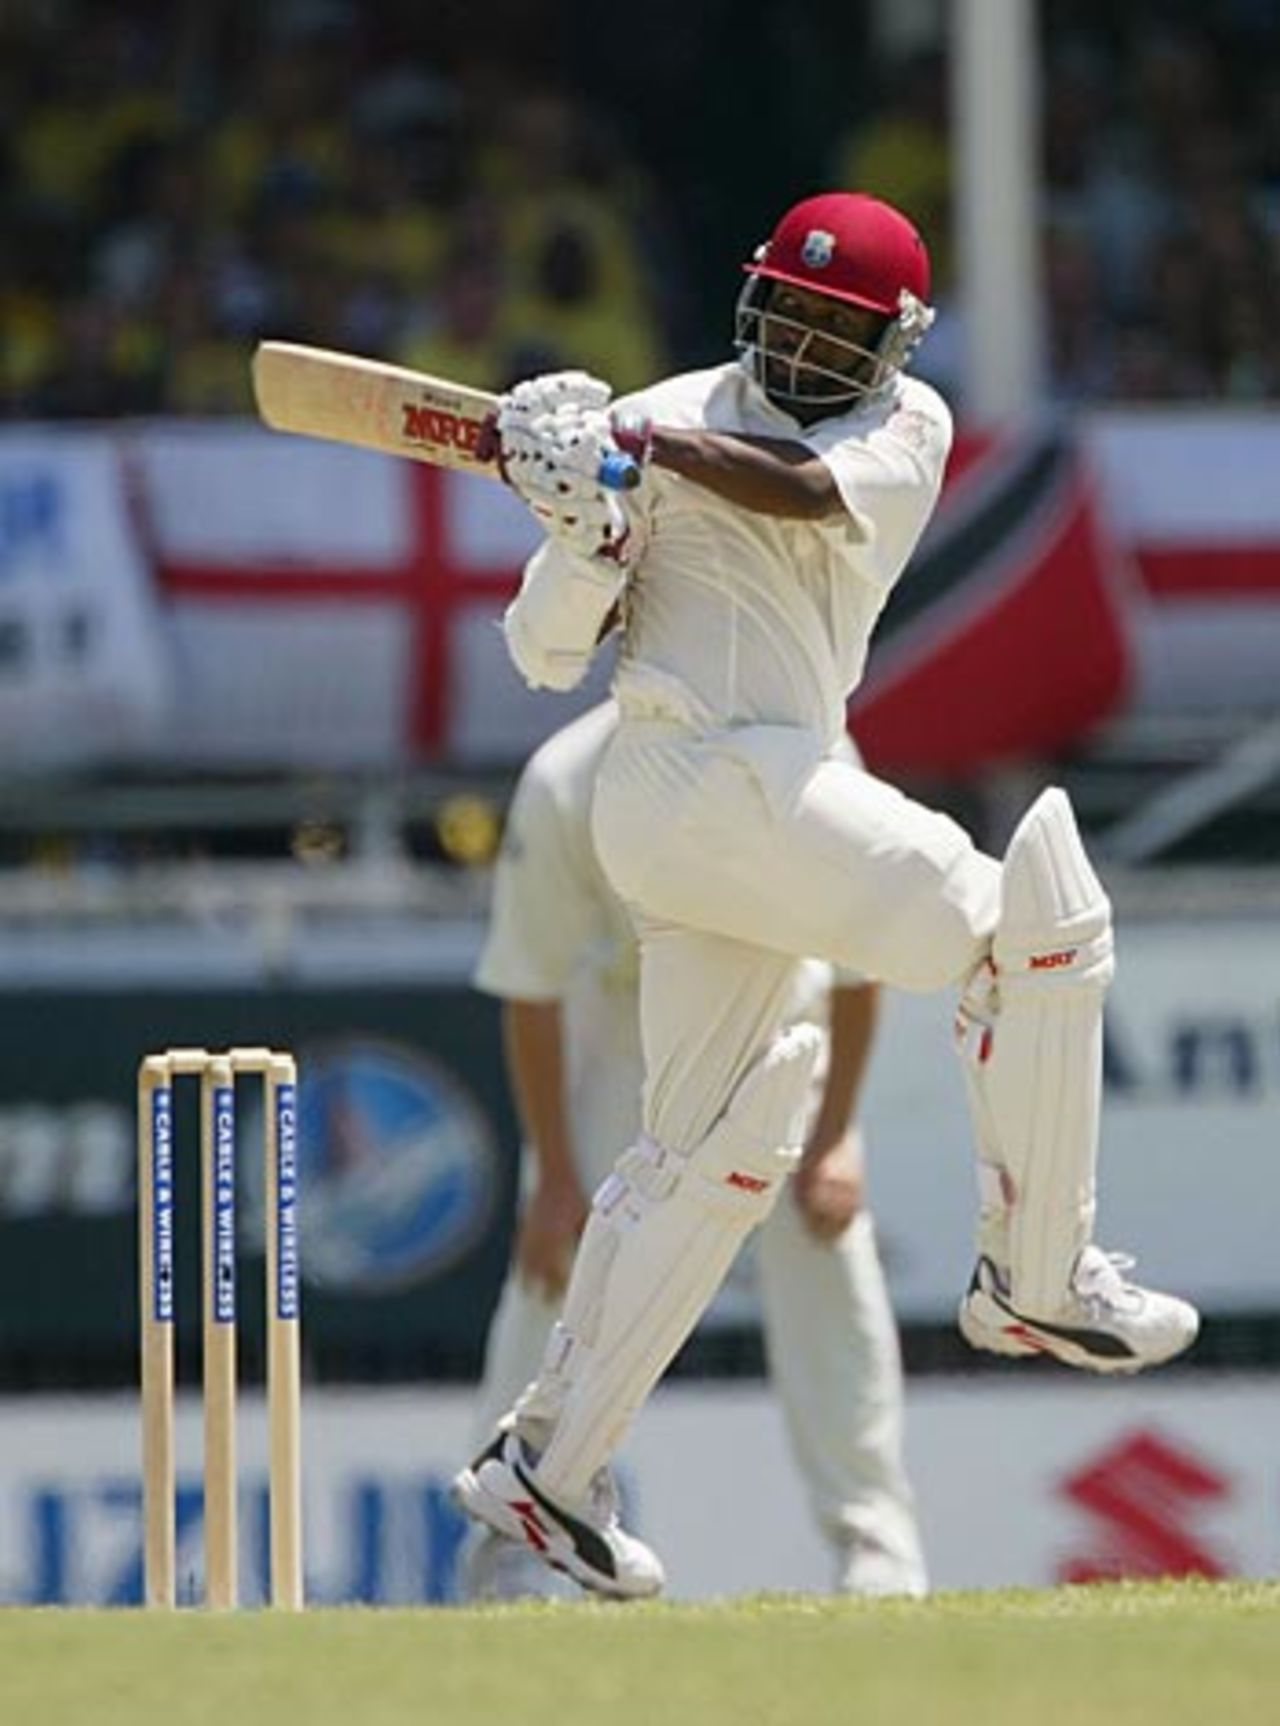 Brian Lara pulls on his way to 400, West Indies v England, Antigua, April 10, 2004